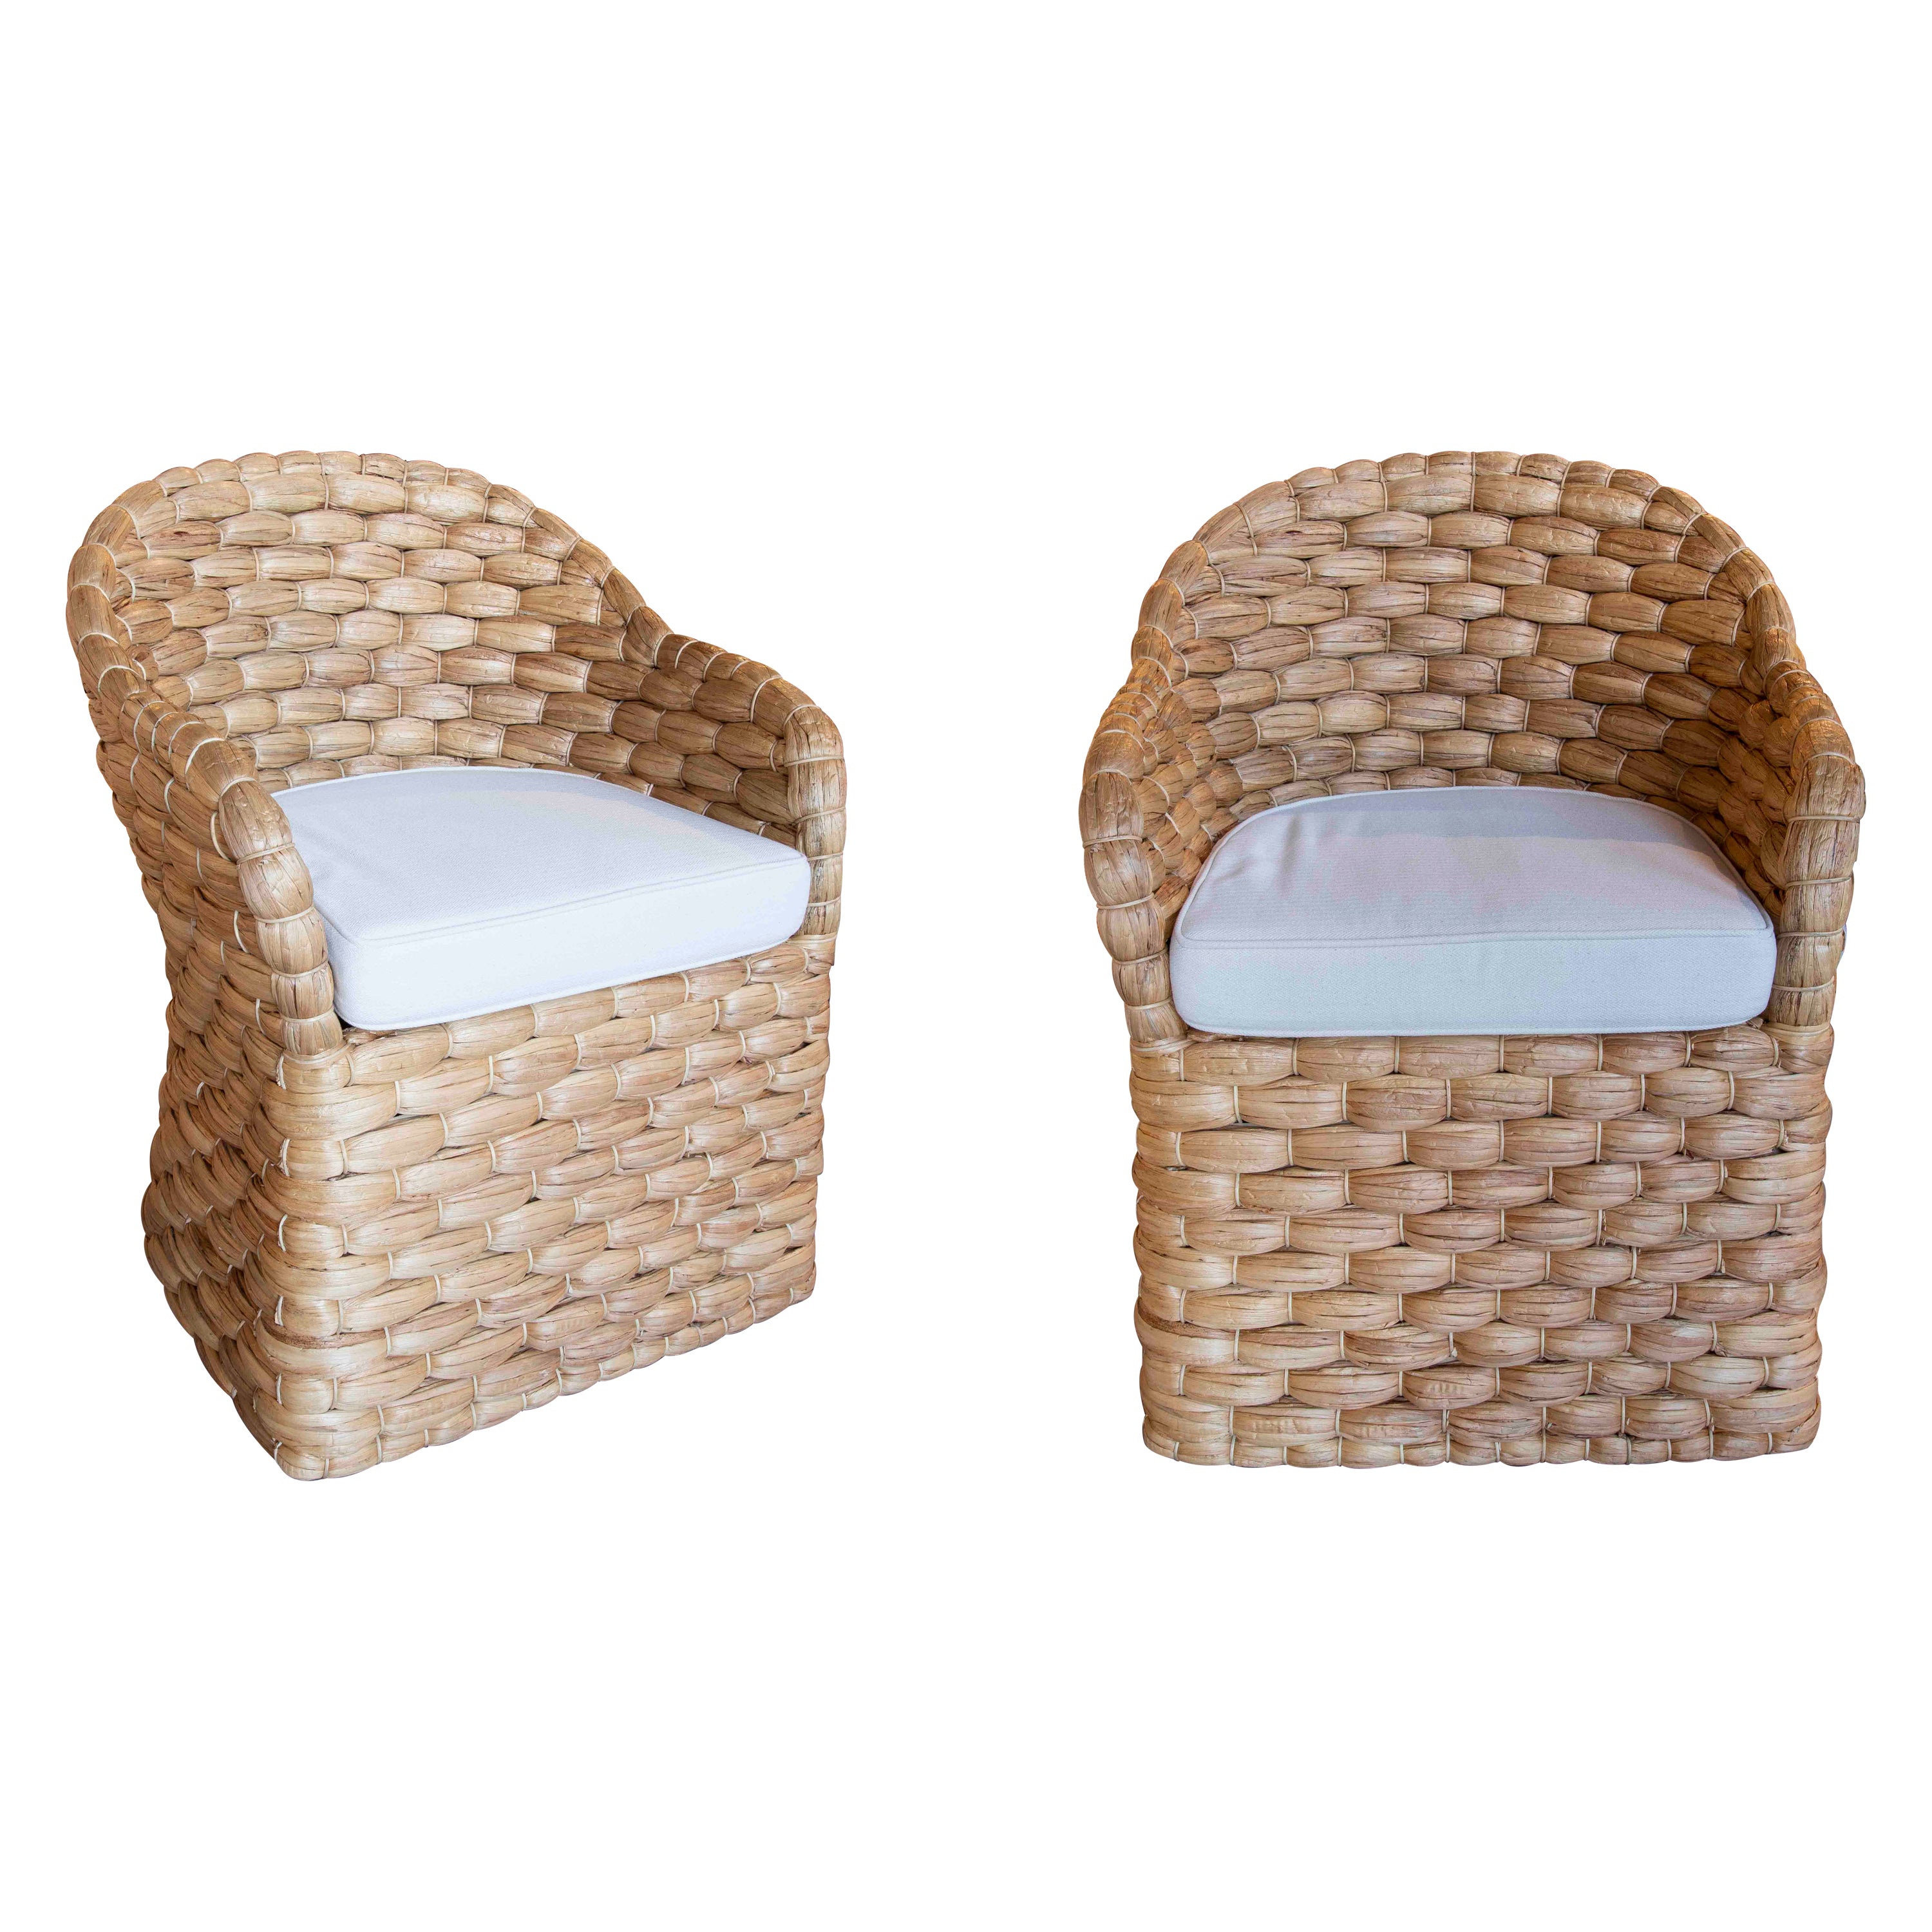 Pair of Rattan Armchairs with Backrest and Cushions in White For Sale